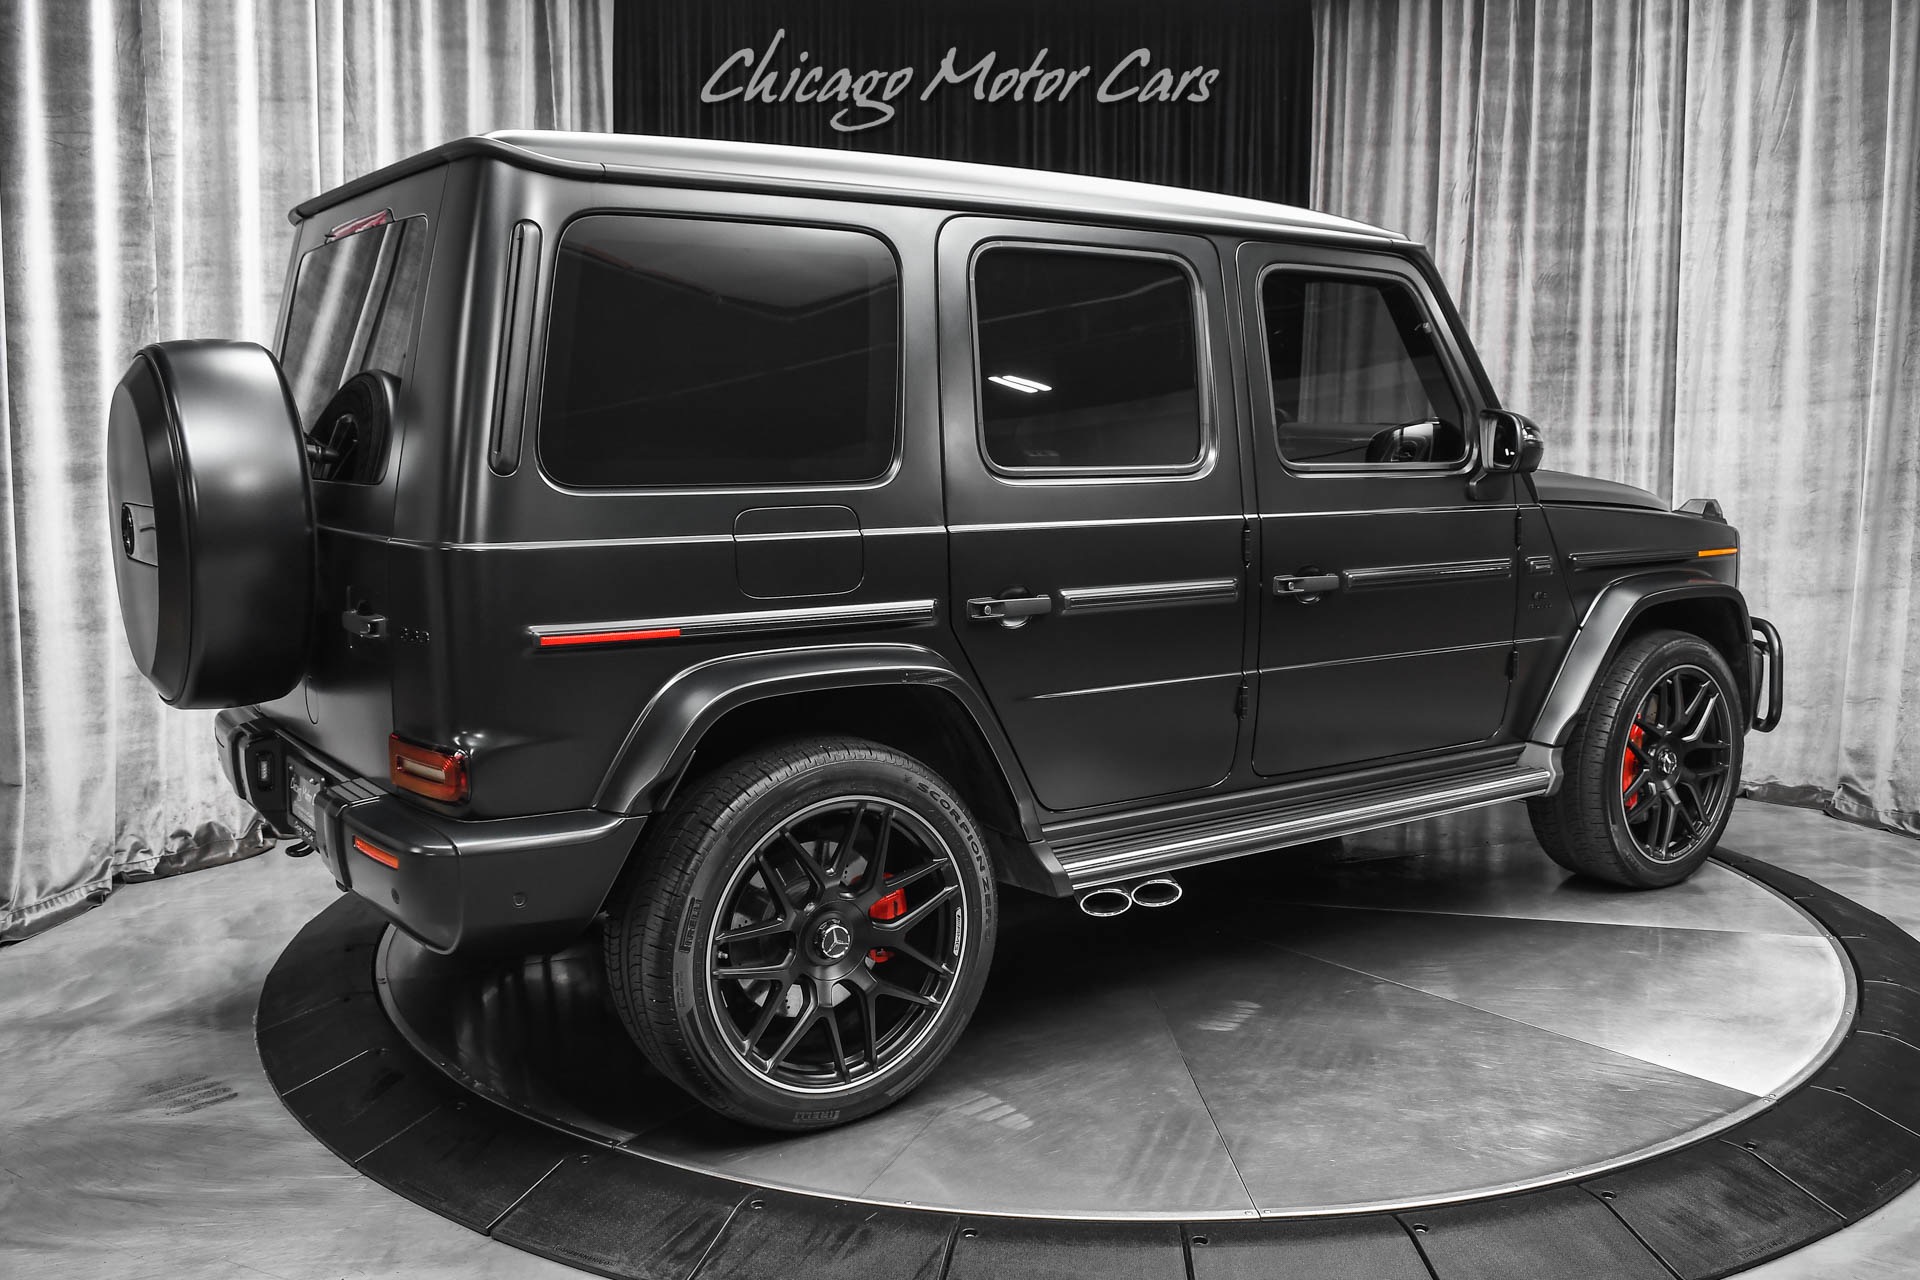 Used-2021-Mercedes-Benz-G63-AMG-4Matic-SUV-LOW-Miles-Exclusive-Interior-Pkg-Night-Pkg-Magno-LOADED